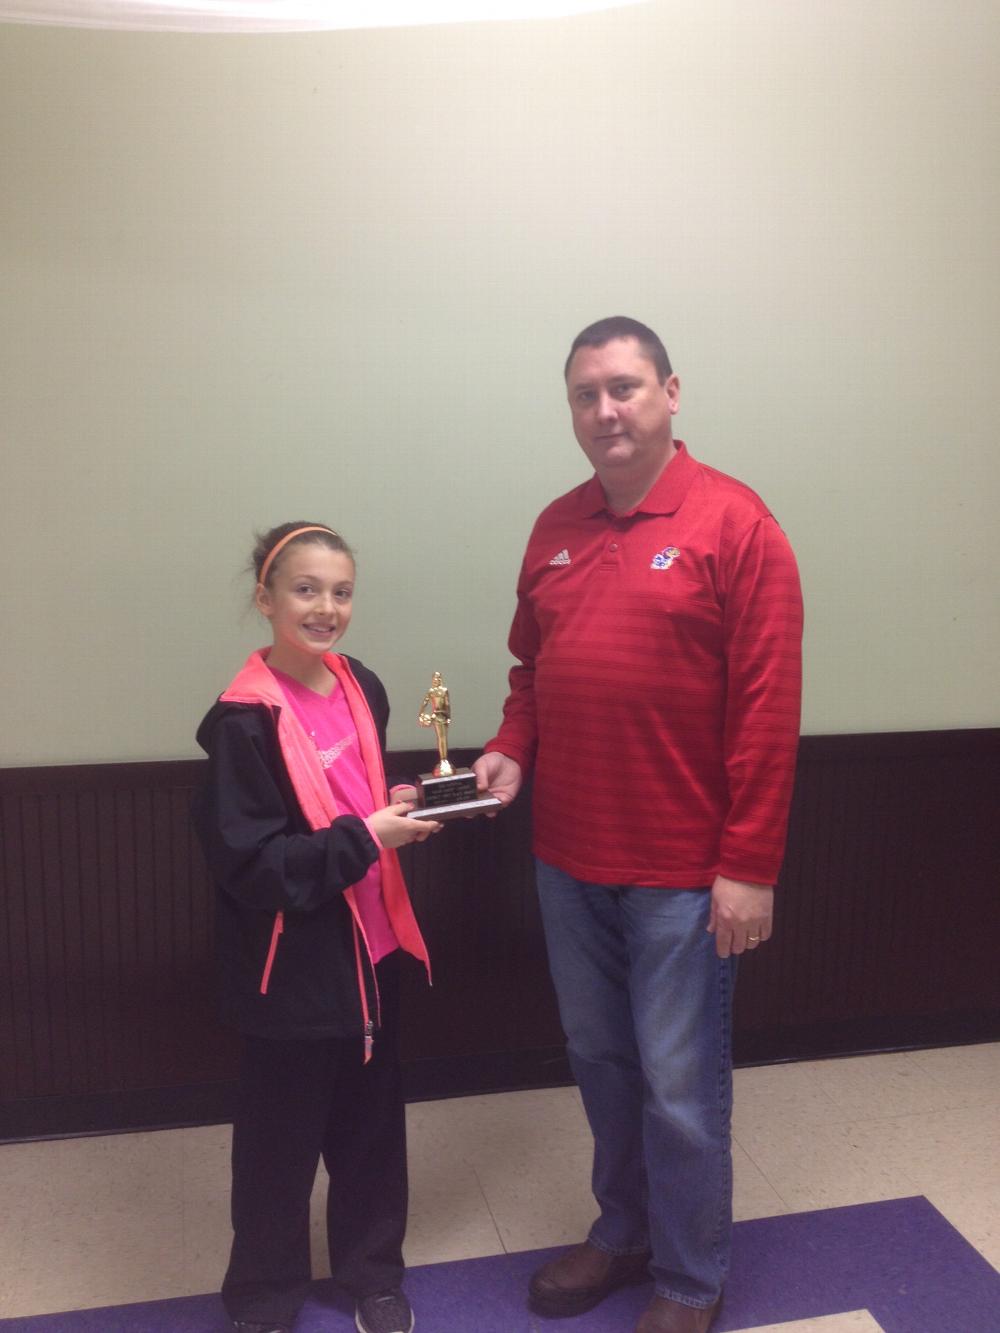 Madison Mills with her 1st Place trophy in 2015/2016 Farmington Elks shootout.